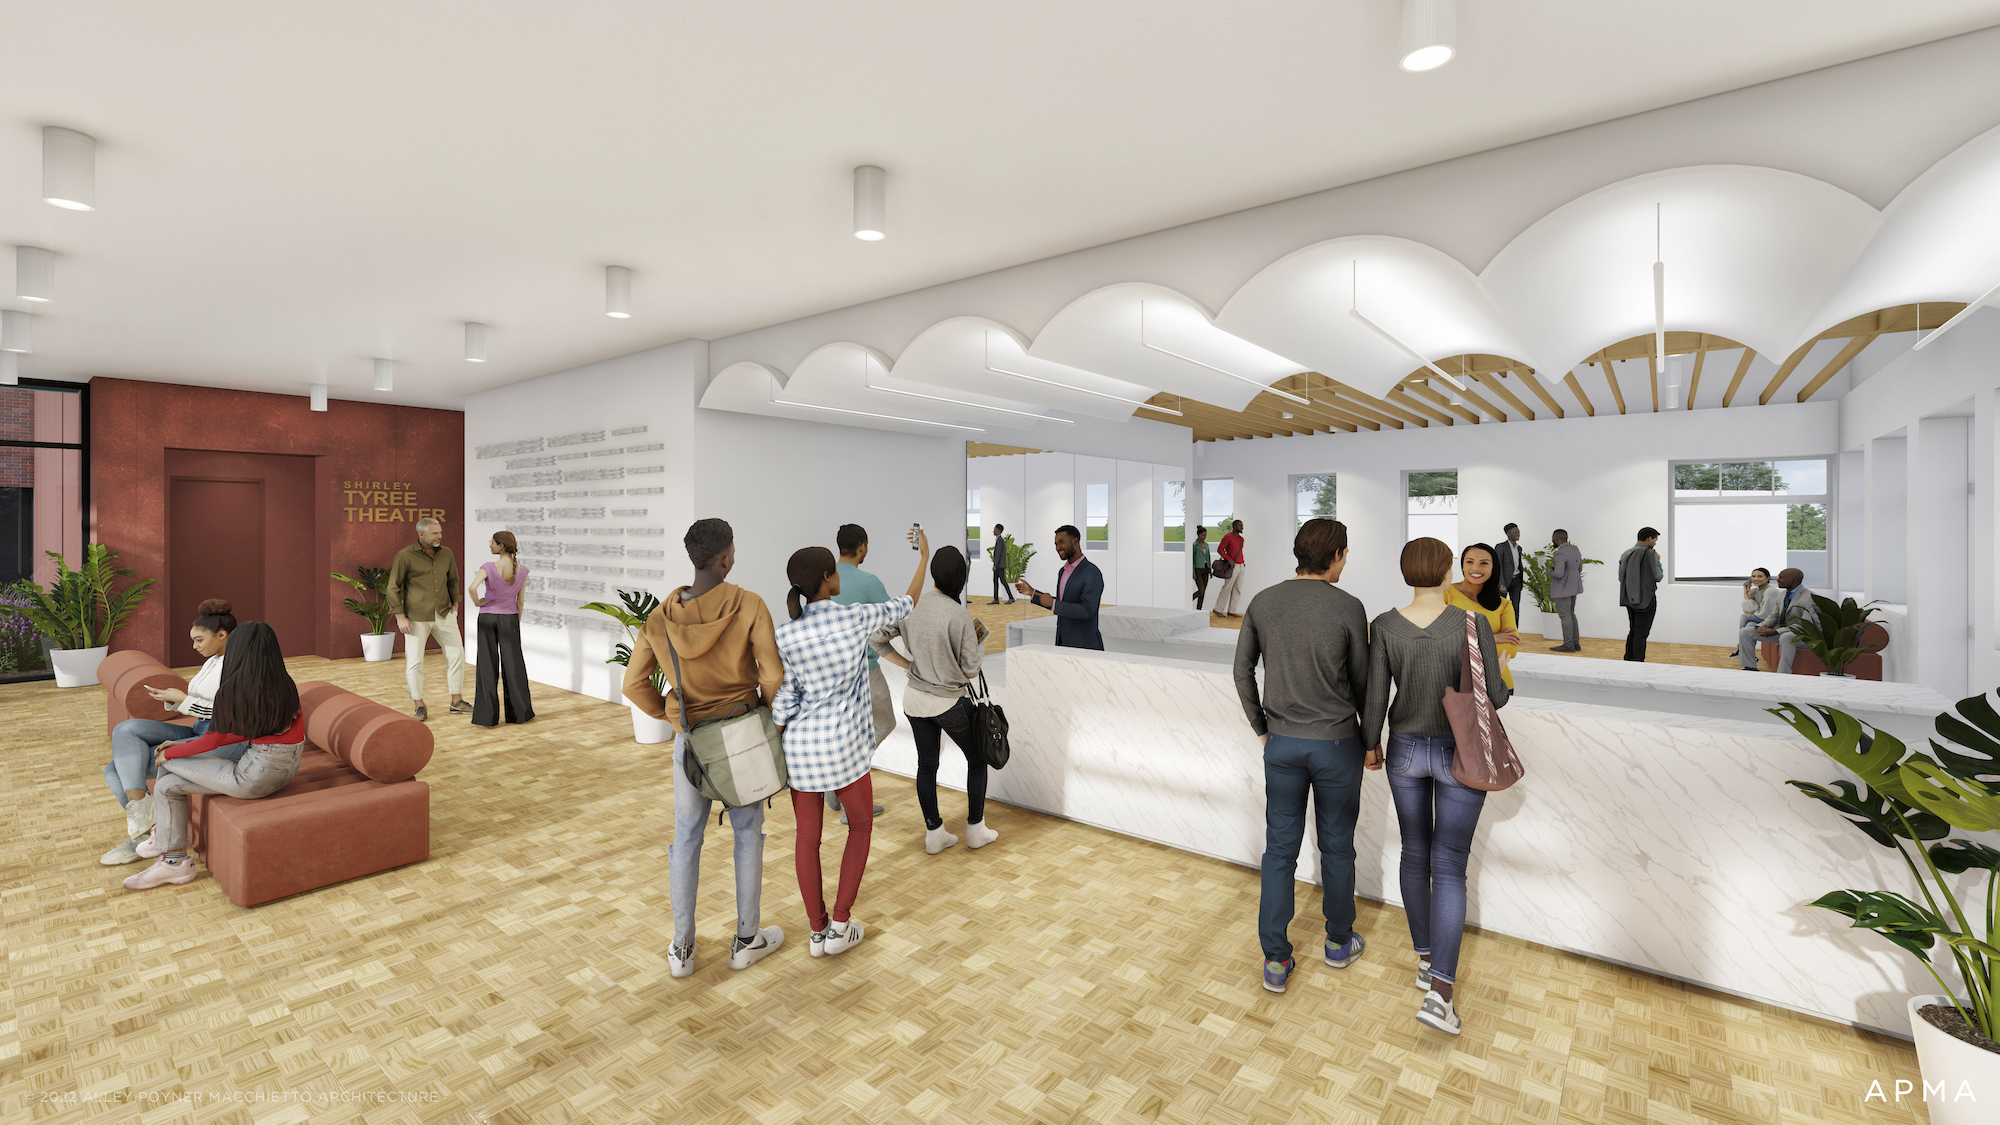 Union theater rendering interior lobby with people in line behind a counter